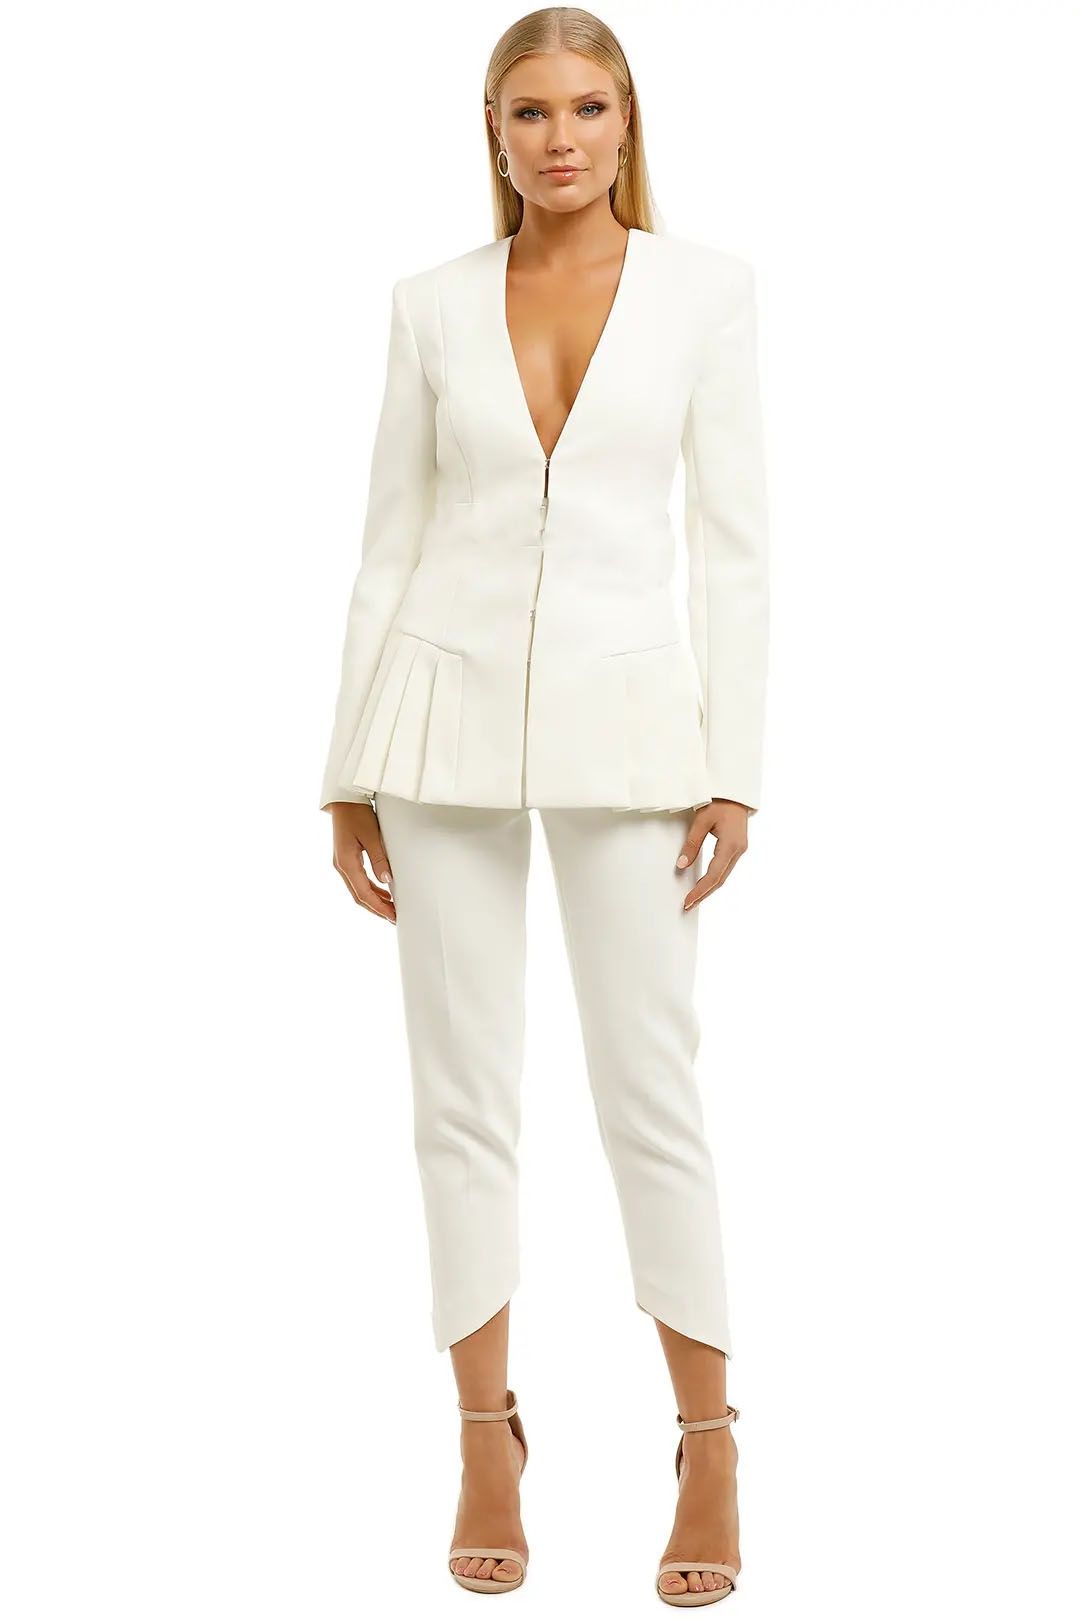 Tamina Linnea Blazer and Pant Set in Ivory by Misha for Hire | GlamCorner